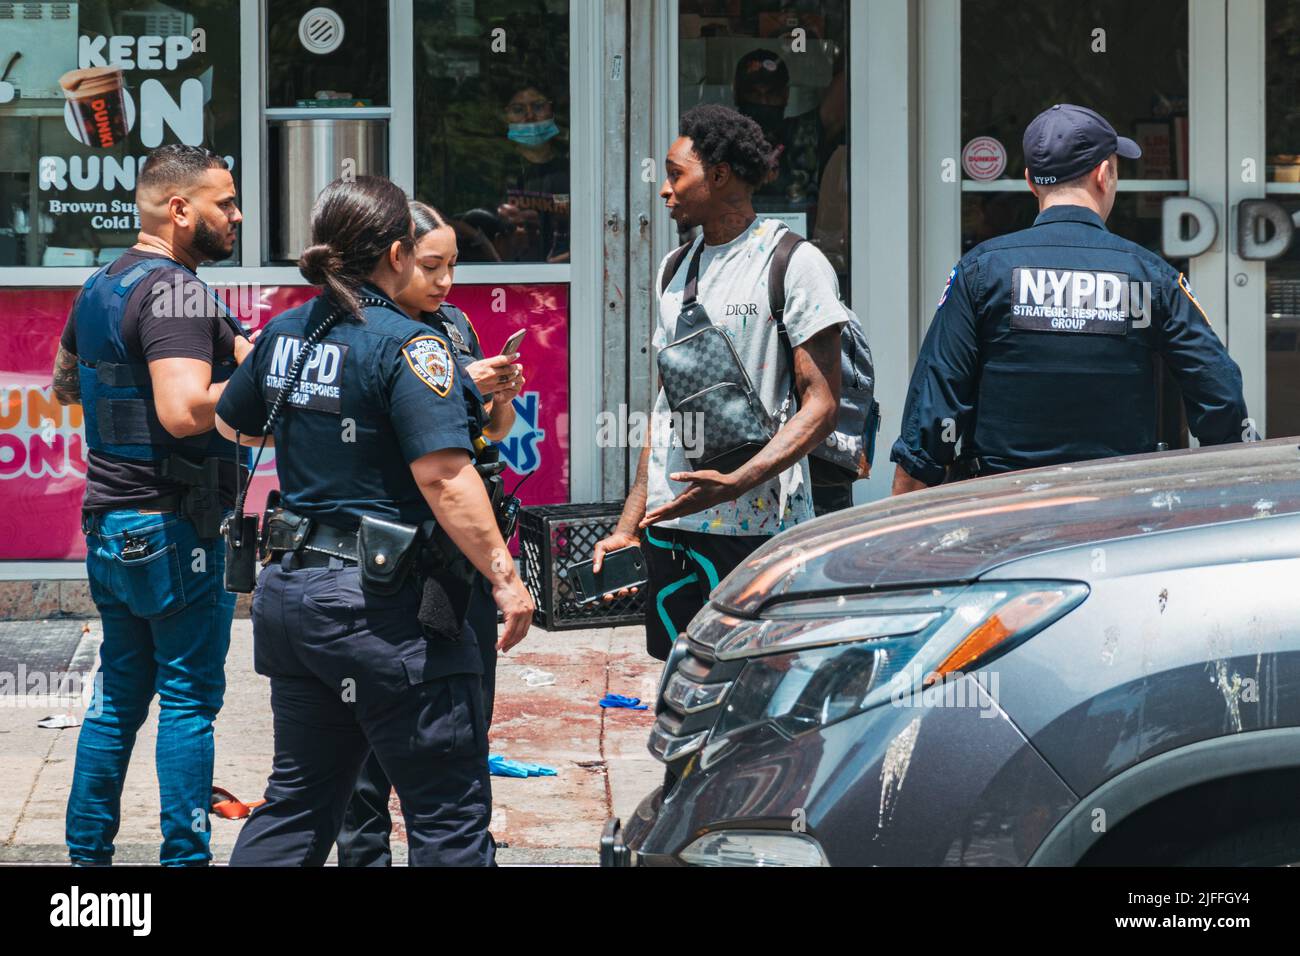 July 2, 2022: NYPD officers speak with a man in front of the scene of a shooting in Manhattan's Lower East Side, New York Stock Photo